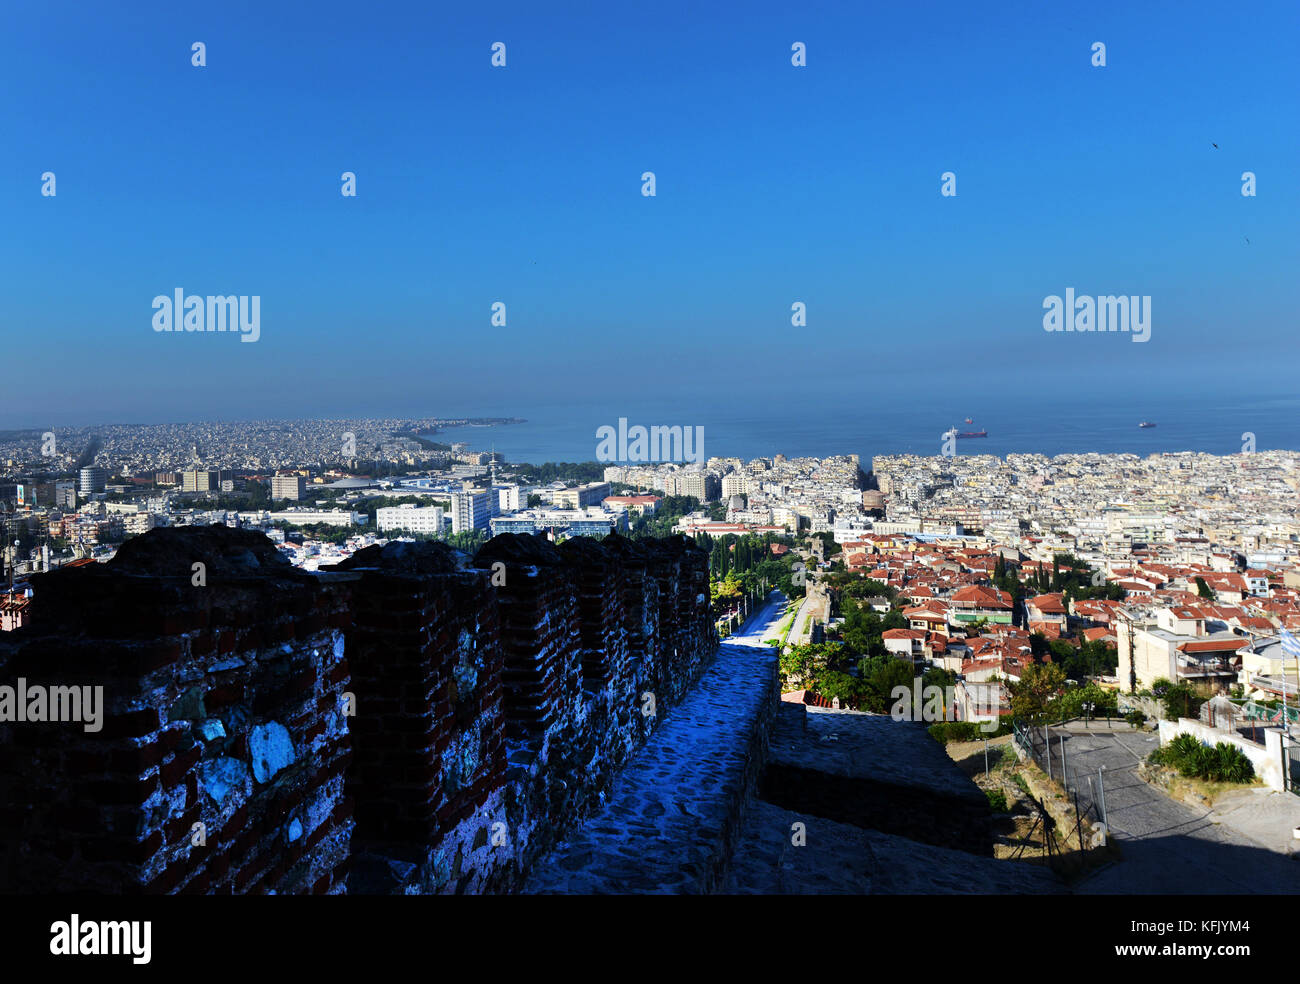 A view of Thessaloniki from the old city walls. Stock Photo